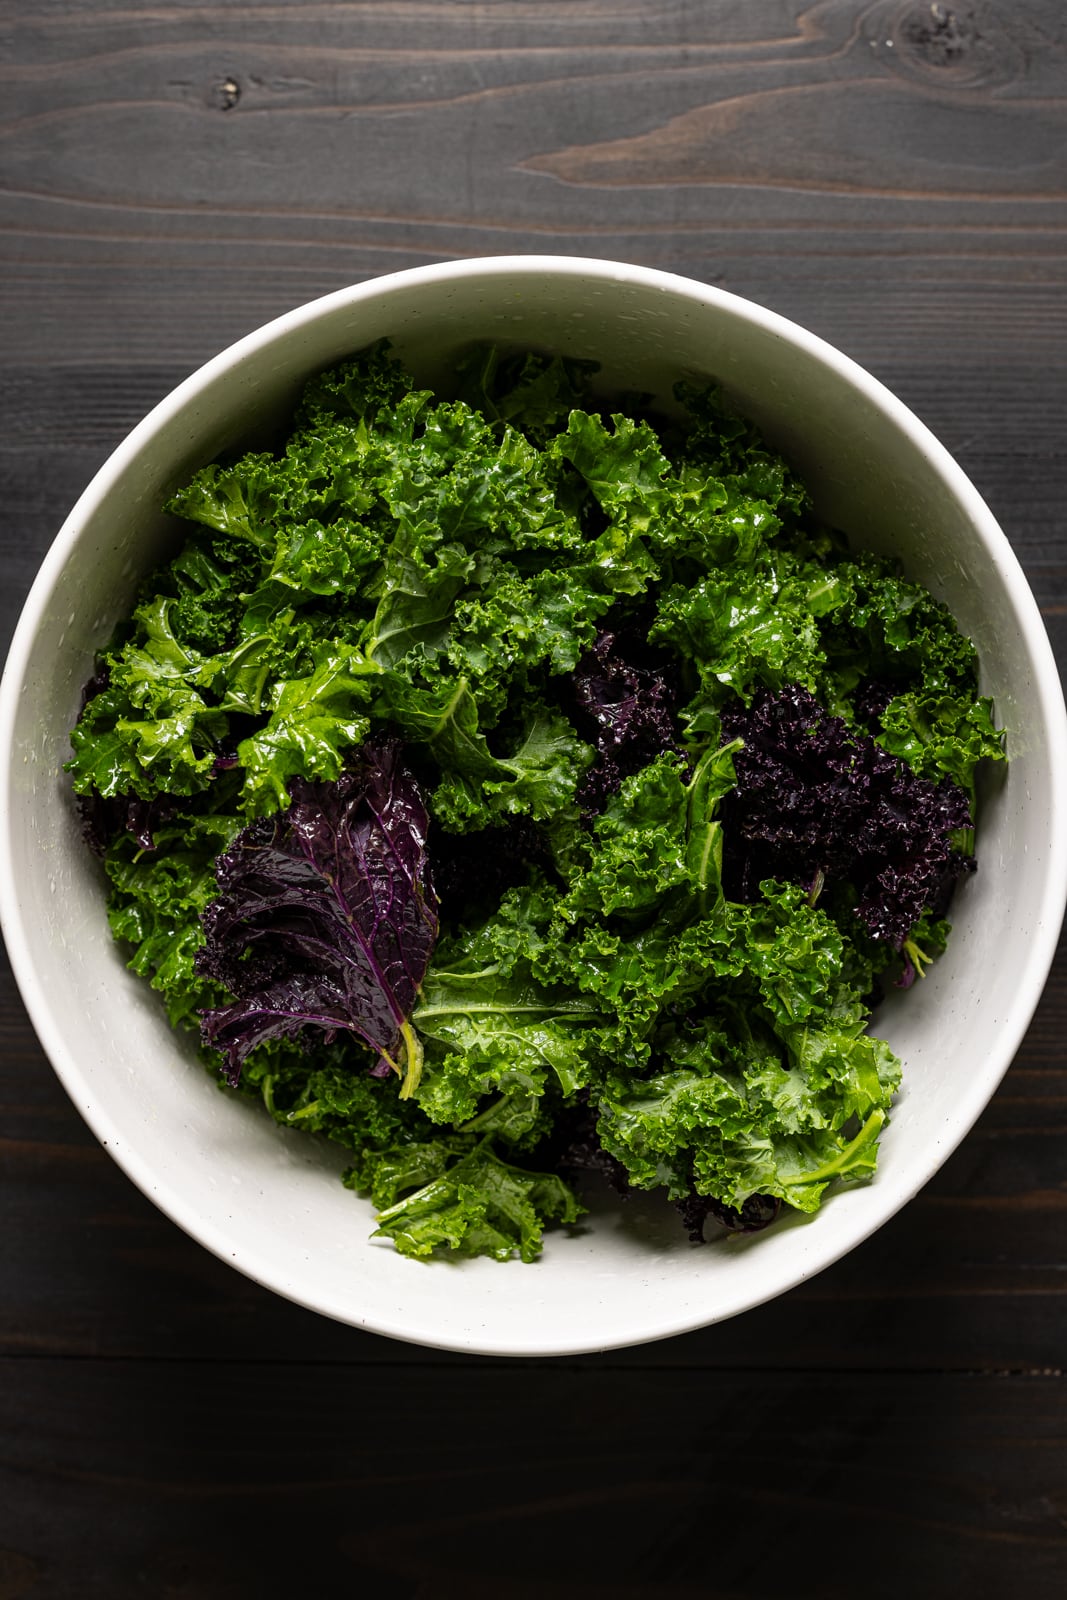 Kale in a bowl on a black wood table.